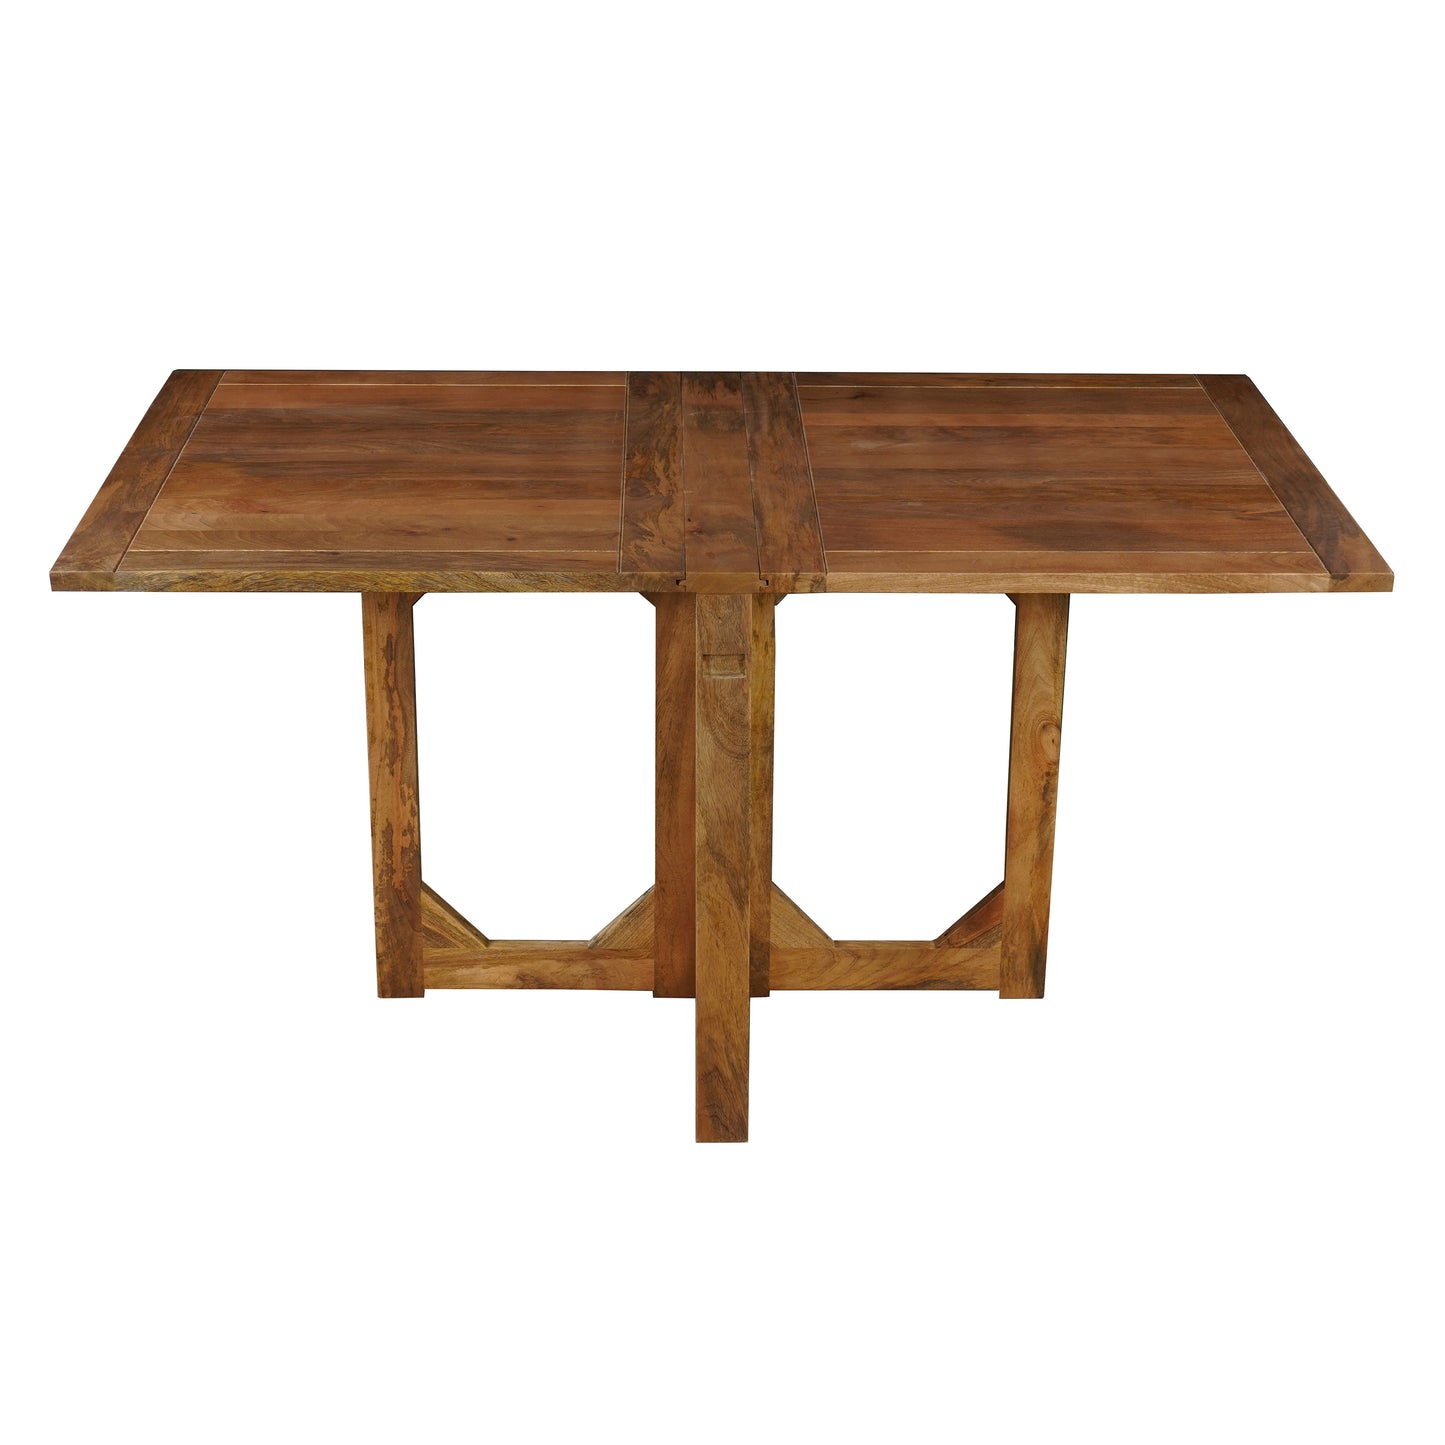 Modern Farmhouse Rectangular Dining Table 62" Handcrafted Natural Mango Wood with Magnetic Catchers By The Urban Port